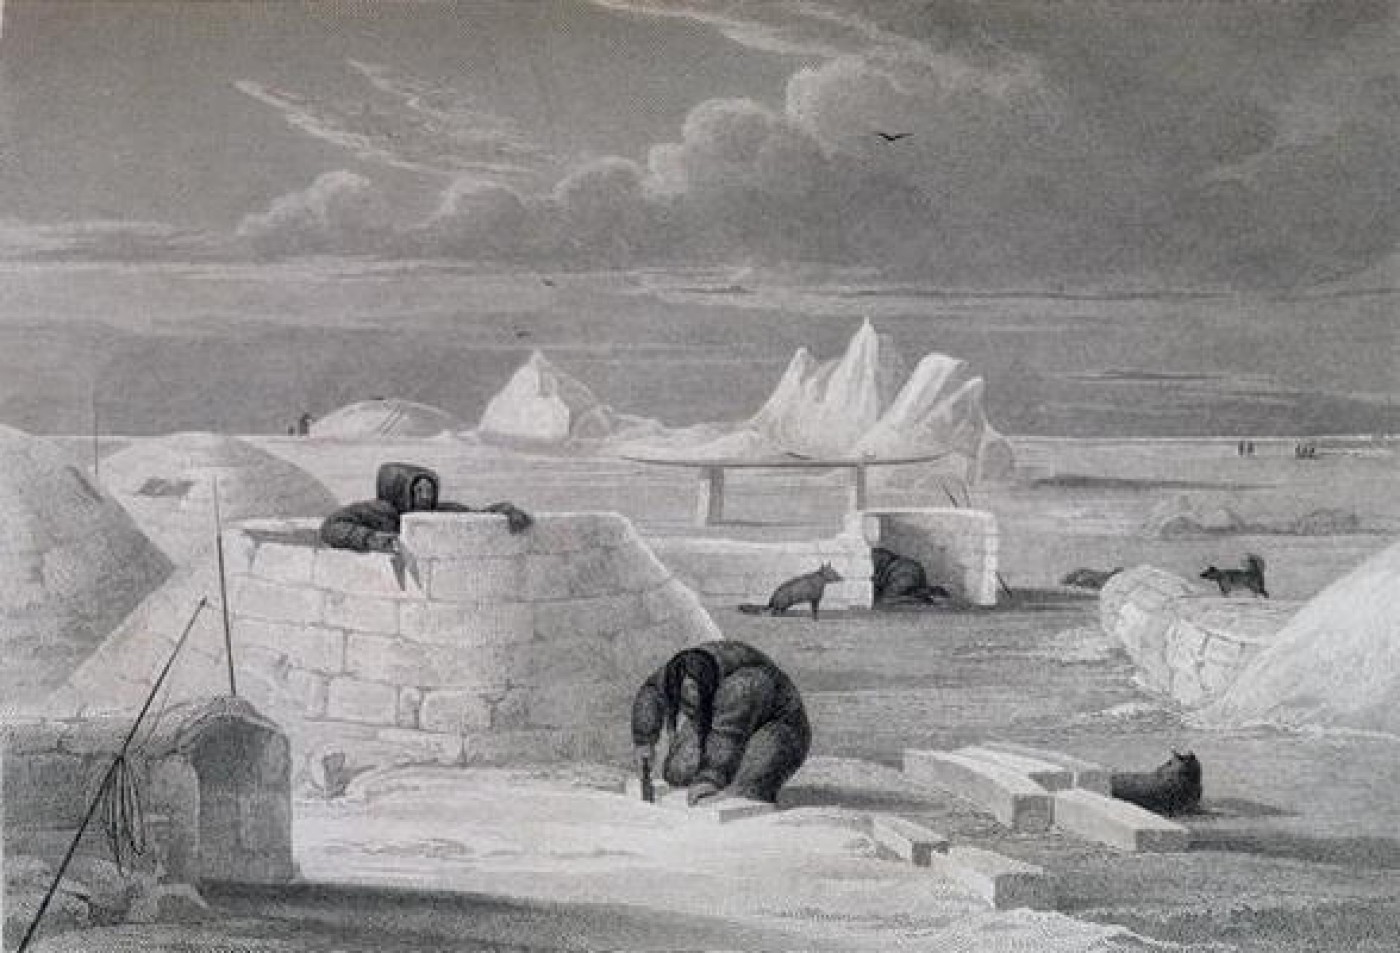 Drawn and engraved by Edward Finden from a sketch by Capt. George Francis Lyon, Eskimaux Building a Snow-hut, from the The Private Journal of Captain G F Lyon of HMS Hecla during the recent Voyage of Discovery under Captain Parry, Captain George Francis Lyon